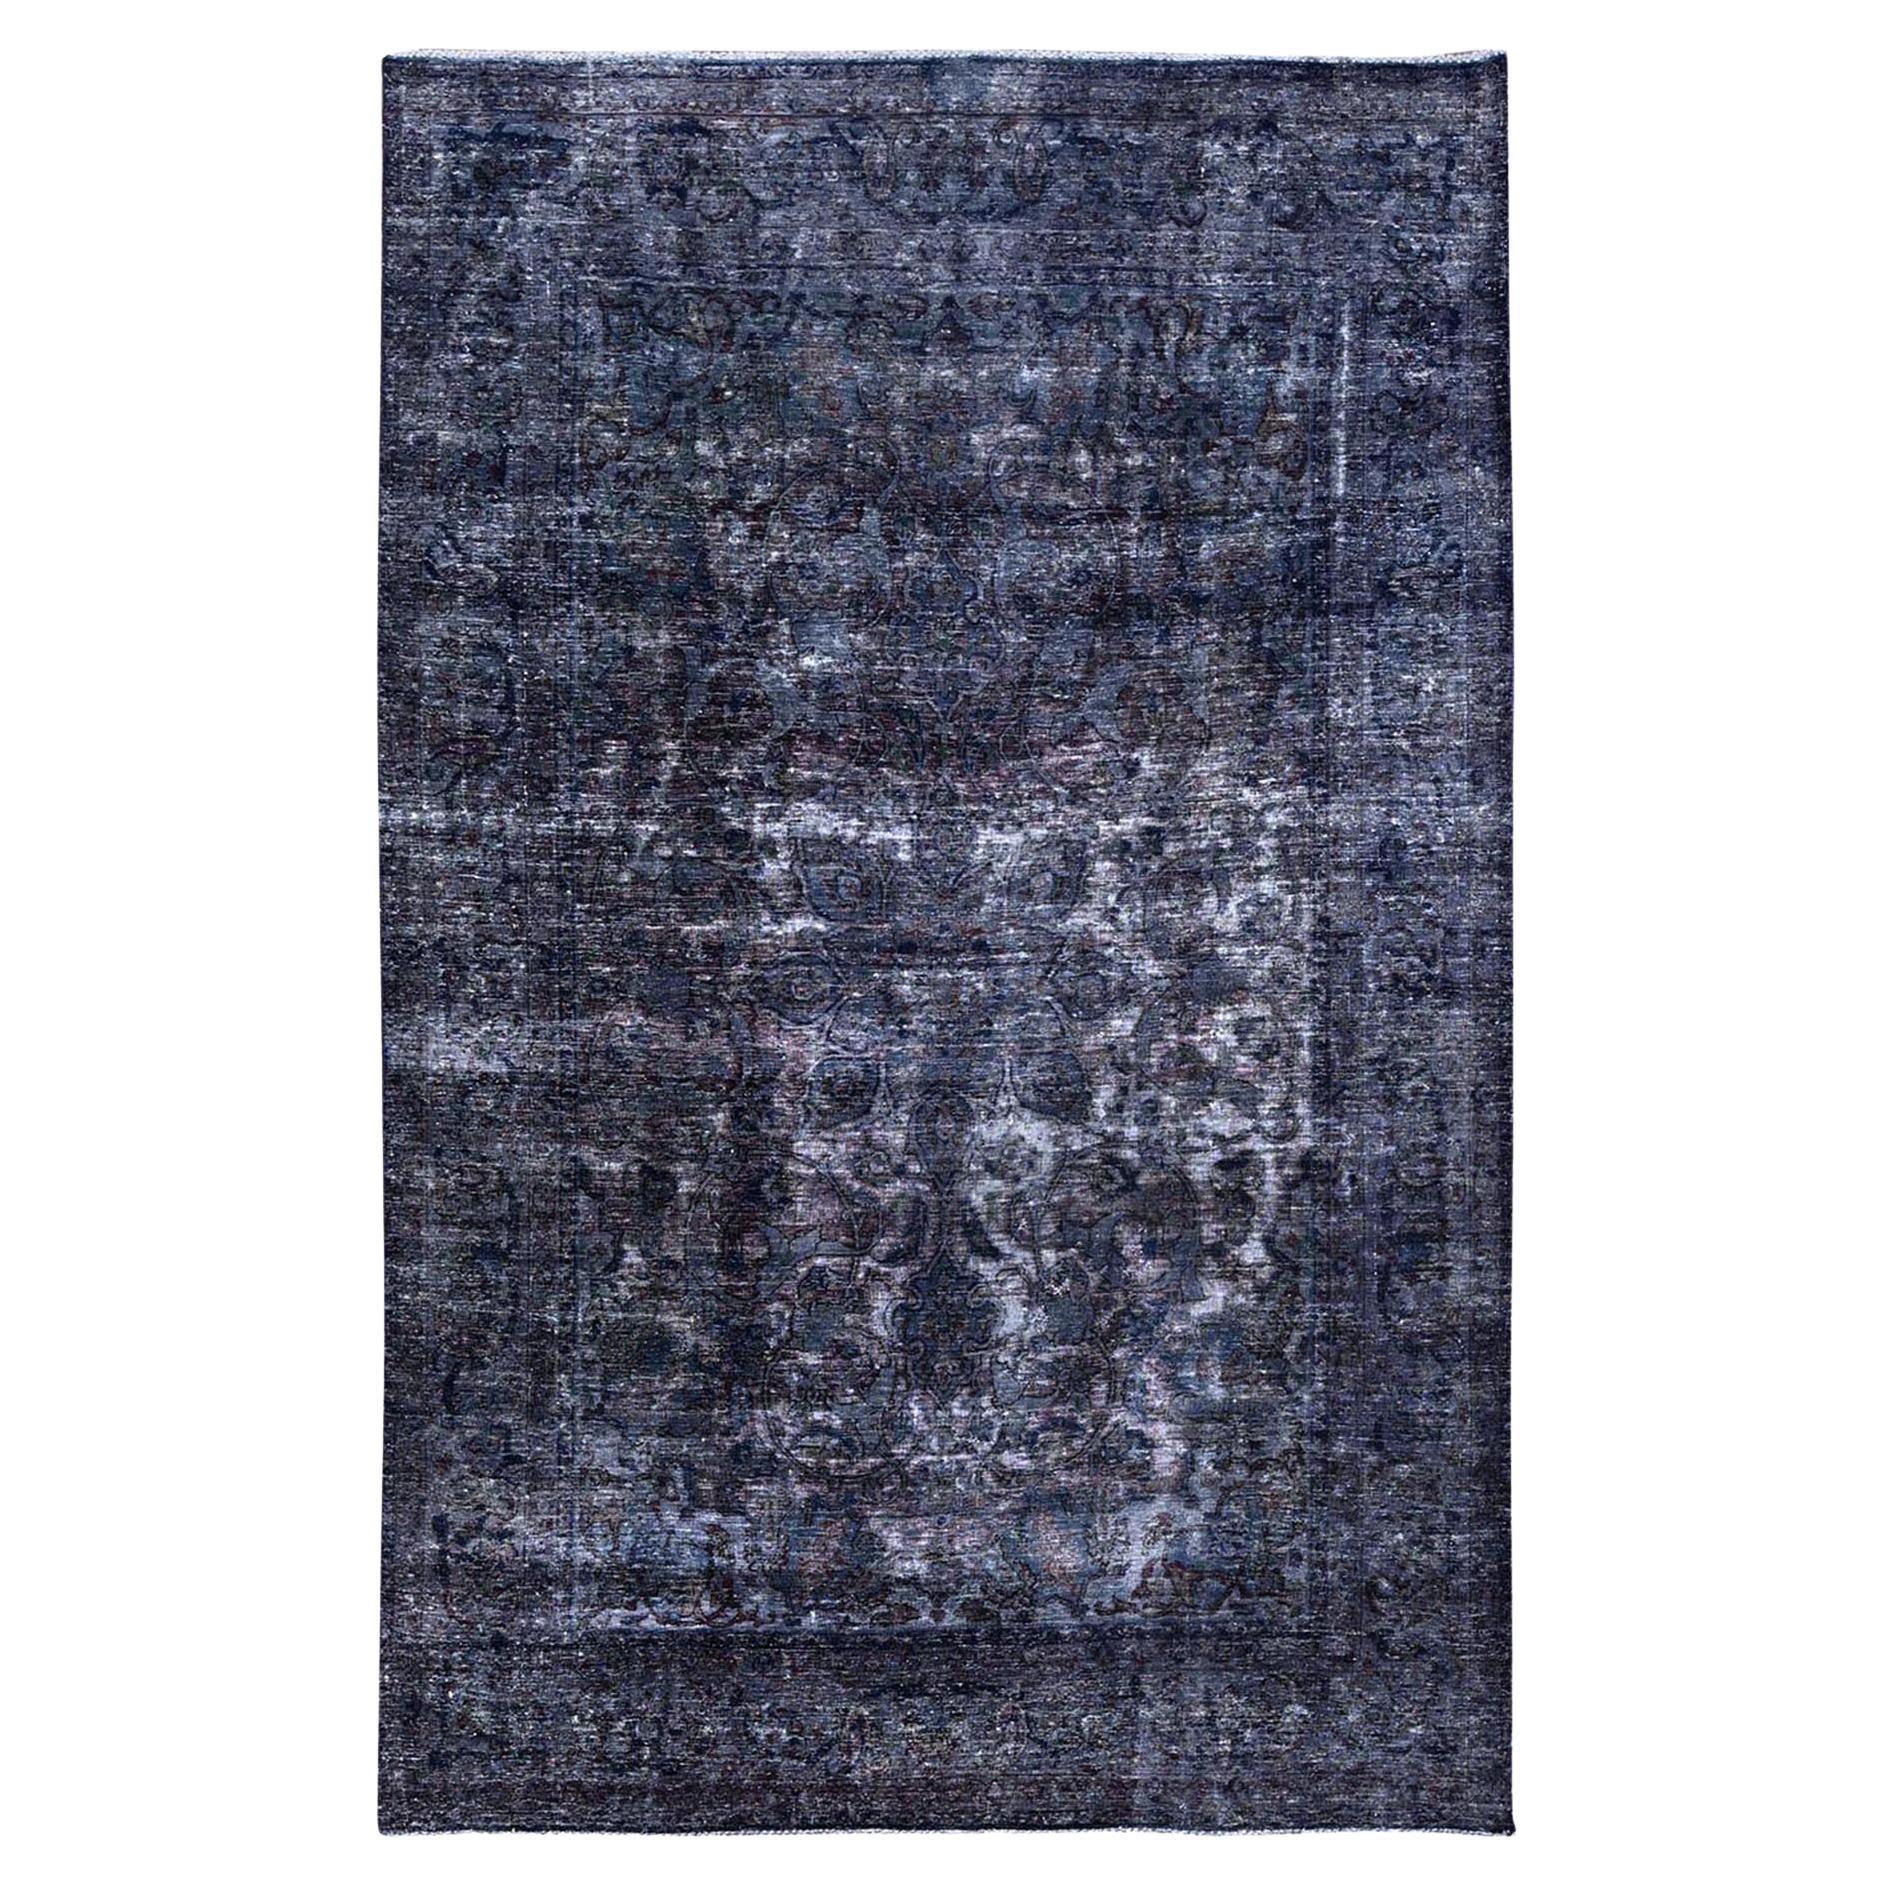 Denim Blue Overdyed Vintage Tabriz Pure Wool Sheared Low Clean Hand Knotted Rug